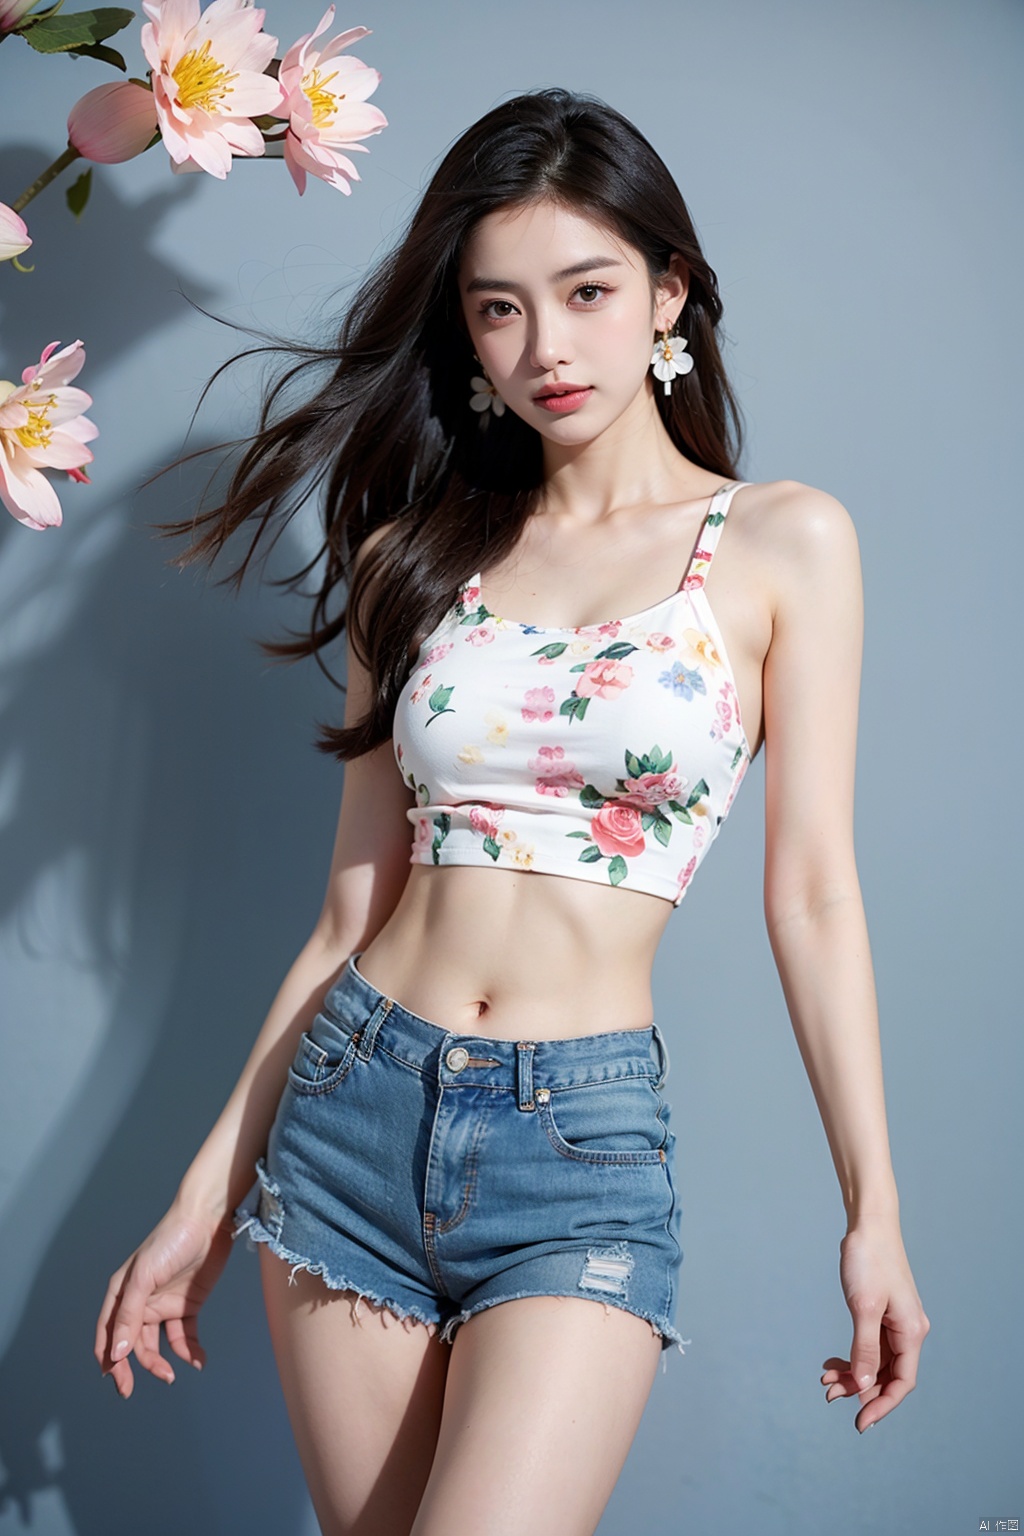  1girl, bare_shoulders, blue_shorts, brown_eyes, brown_hair, cherry_blossoms, cowboy_shot, crop_top, daisy, denim, denim_shorts, earrings, floral_background, floral_print, flower, jewelry, lily_\(flower\), lips, long_hair, looking_at_viewer, lotus, midriff, navel, pink_flower, realistic, short_shorts, shorts, solo, standing, white_flower,breasts